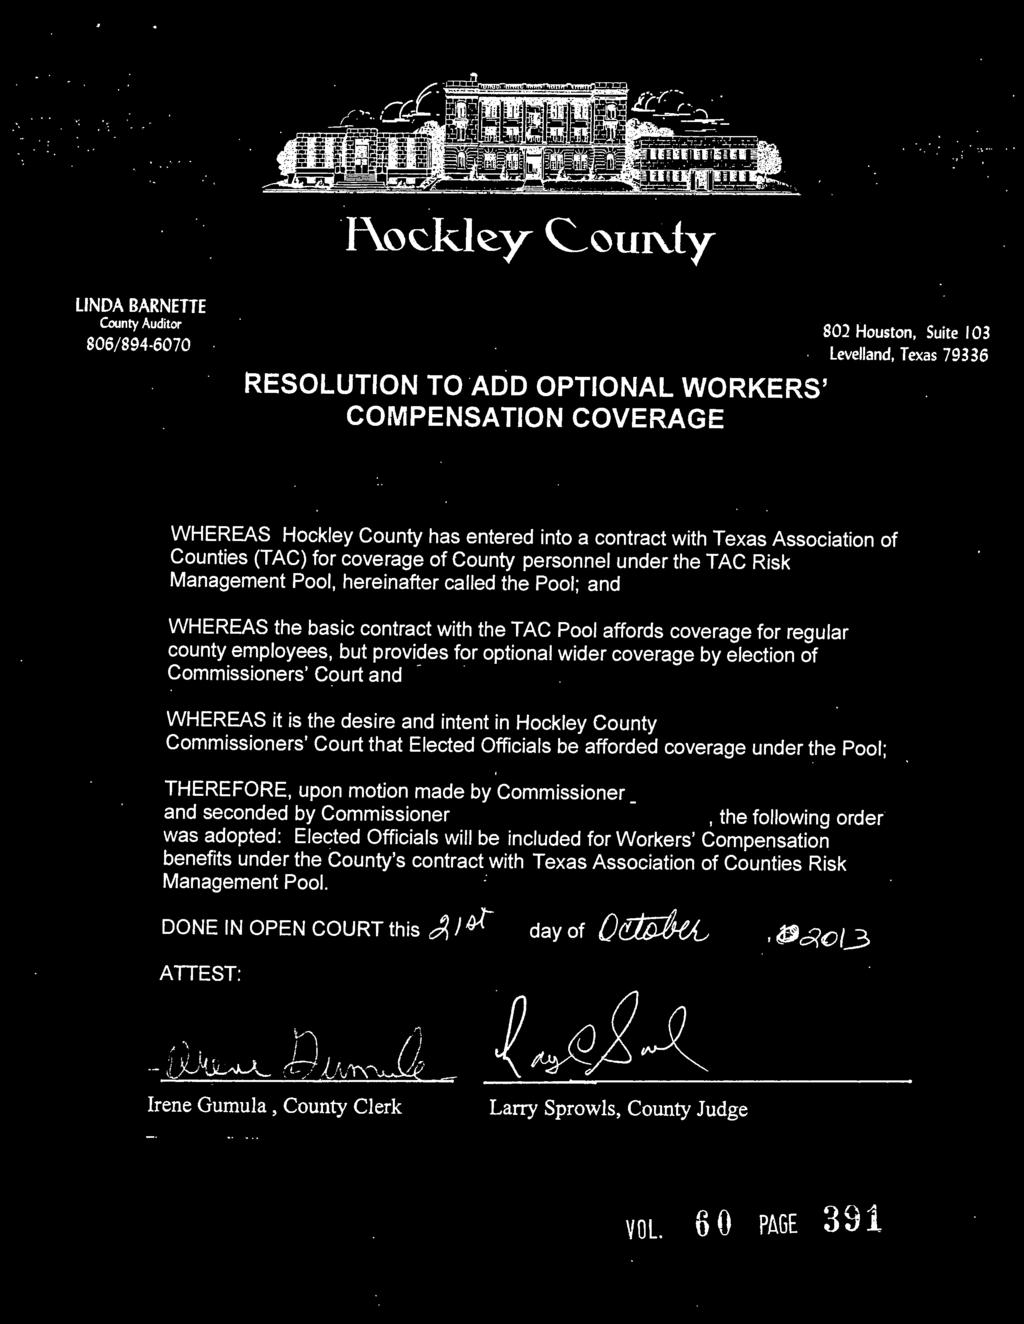 coverage for regular county employees, but provides for optional wider coverage by election of Commissioners' Court and WHEREAS it is the desire and intent in Hockley County Commissioners' Court that